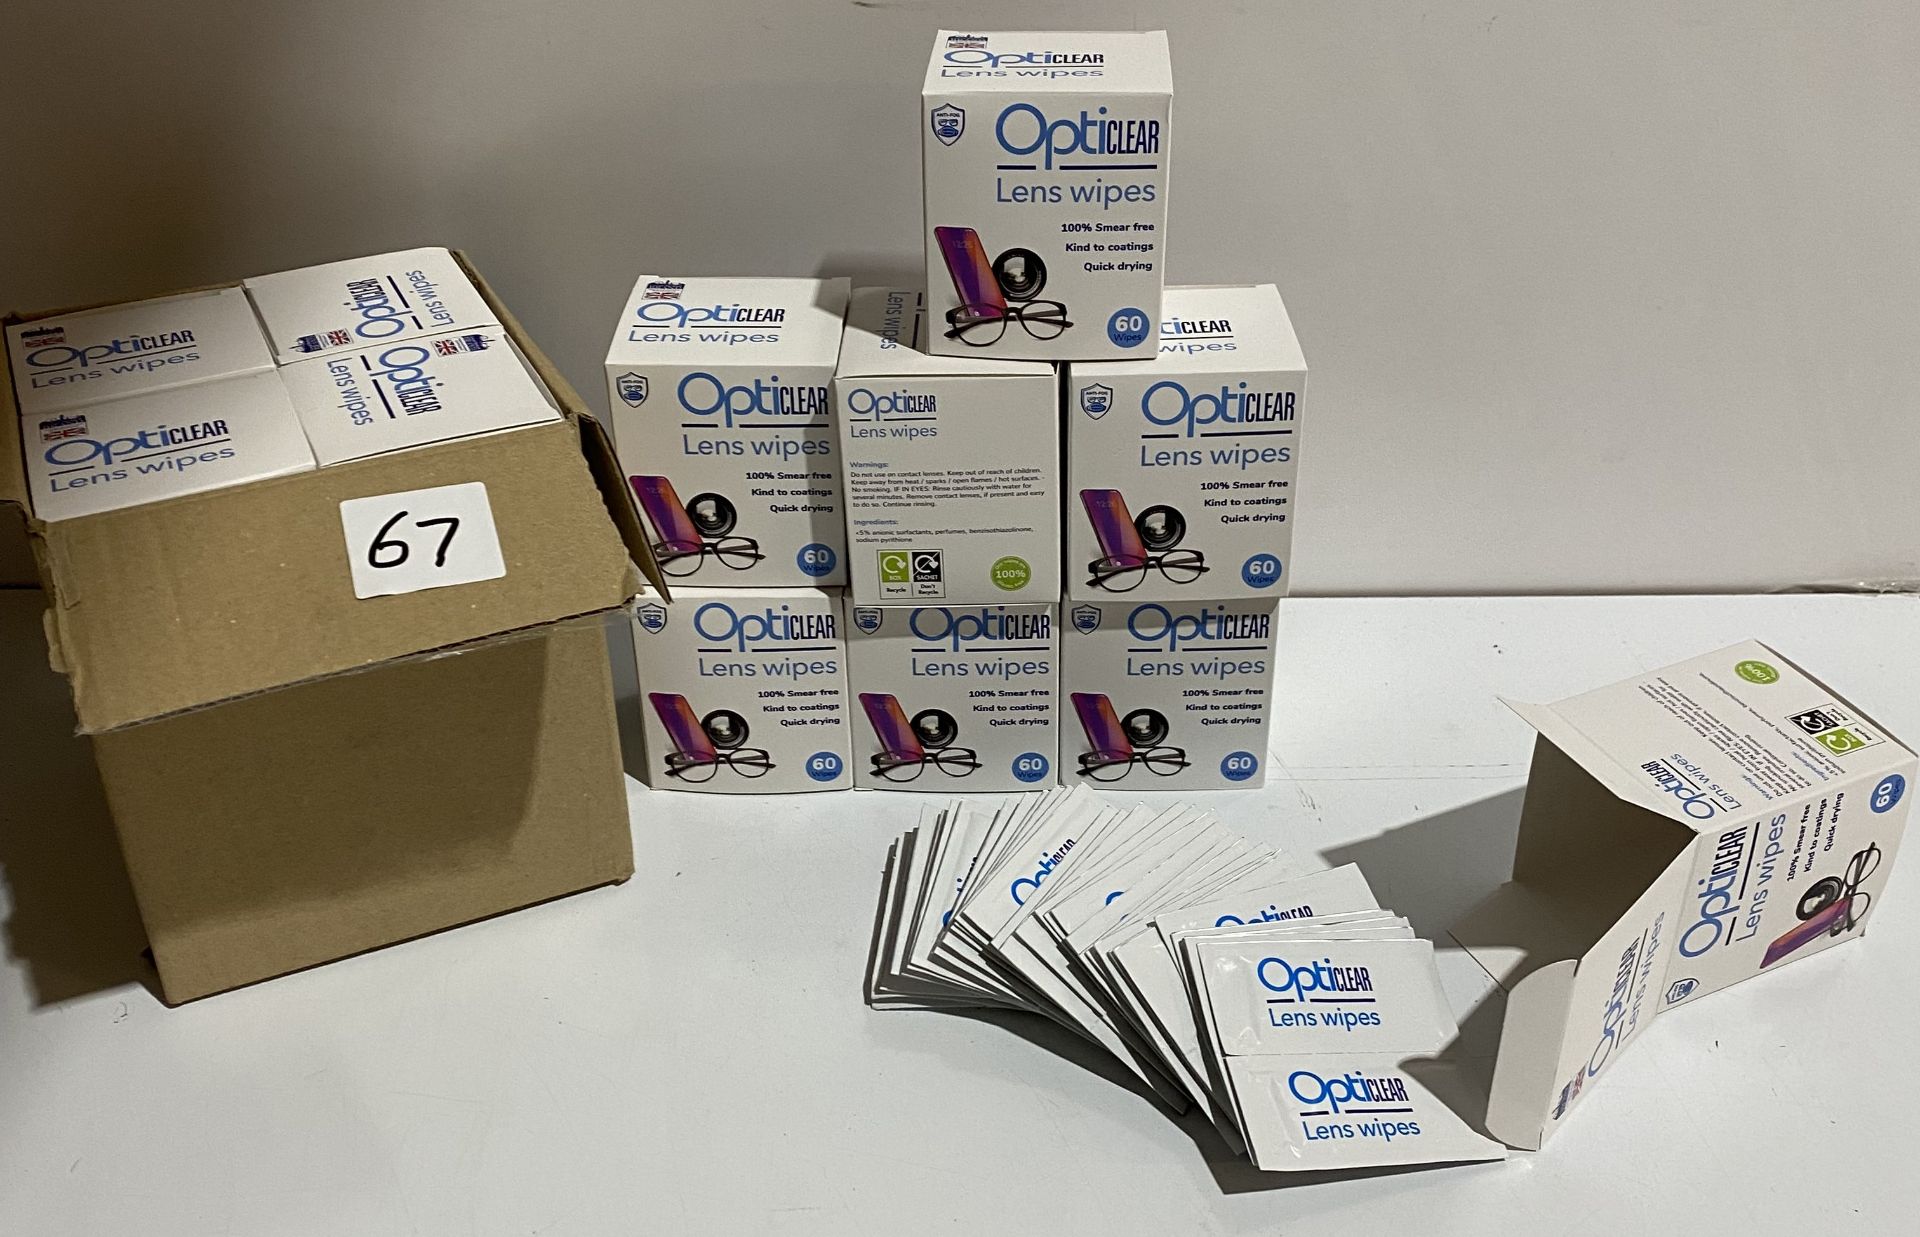 16 boxes of 60 wipes each box opticare lens wipes removes grease/dirt/dust/finger marks etc